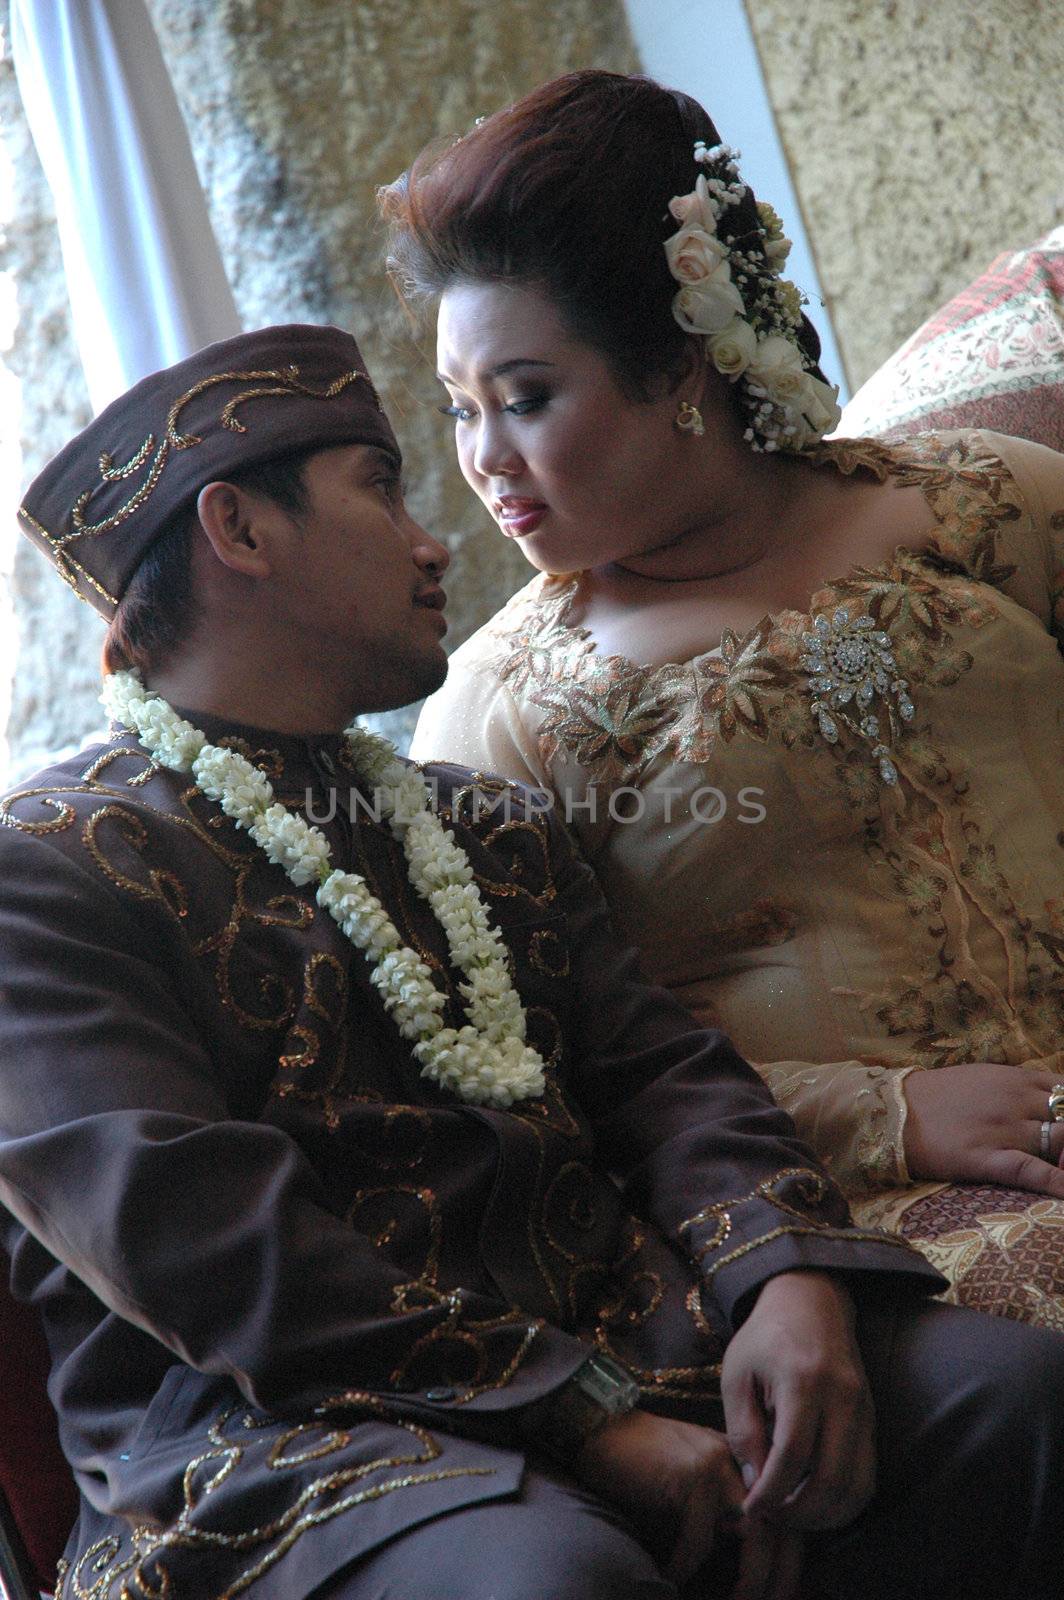 bride and groom wearing traditional costume from west java-indonesia